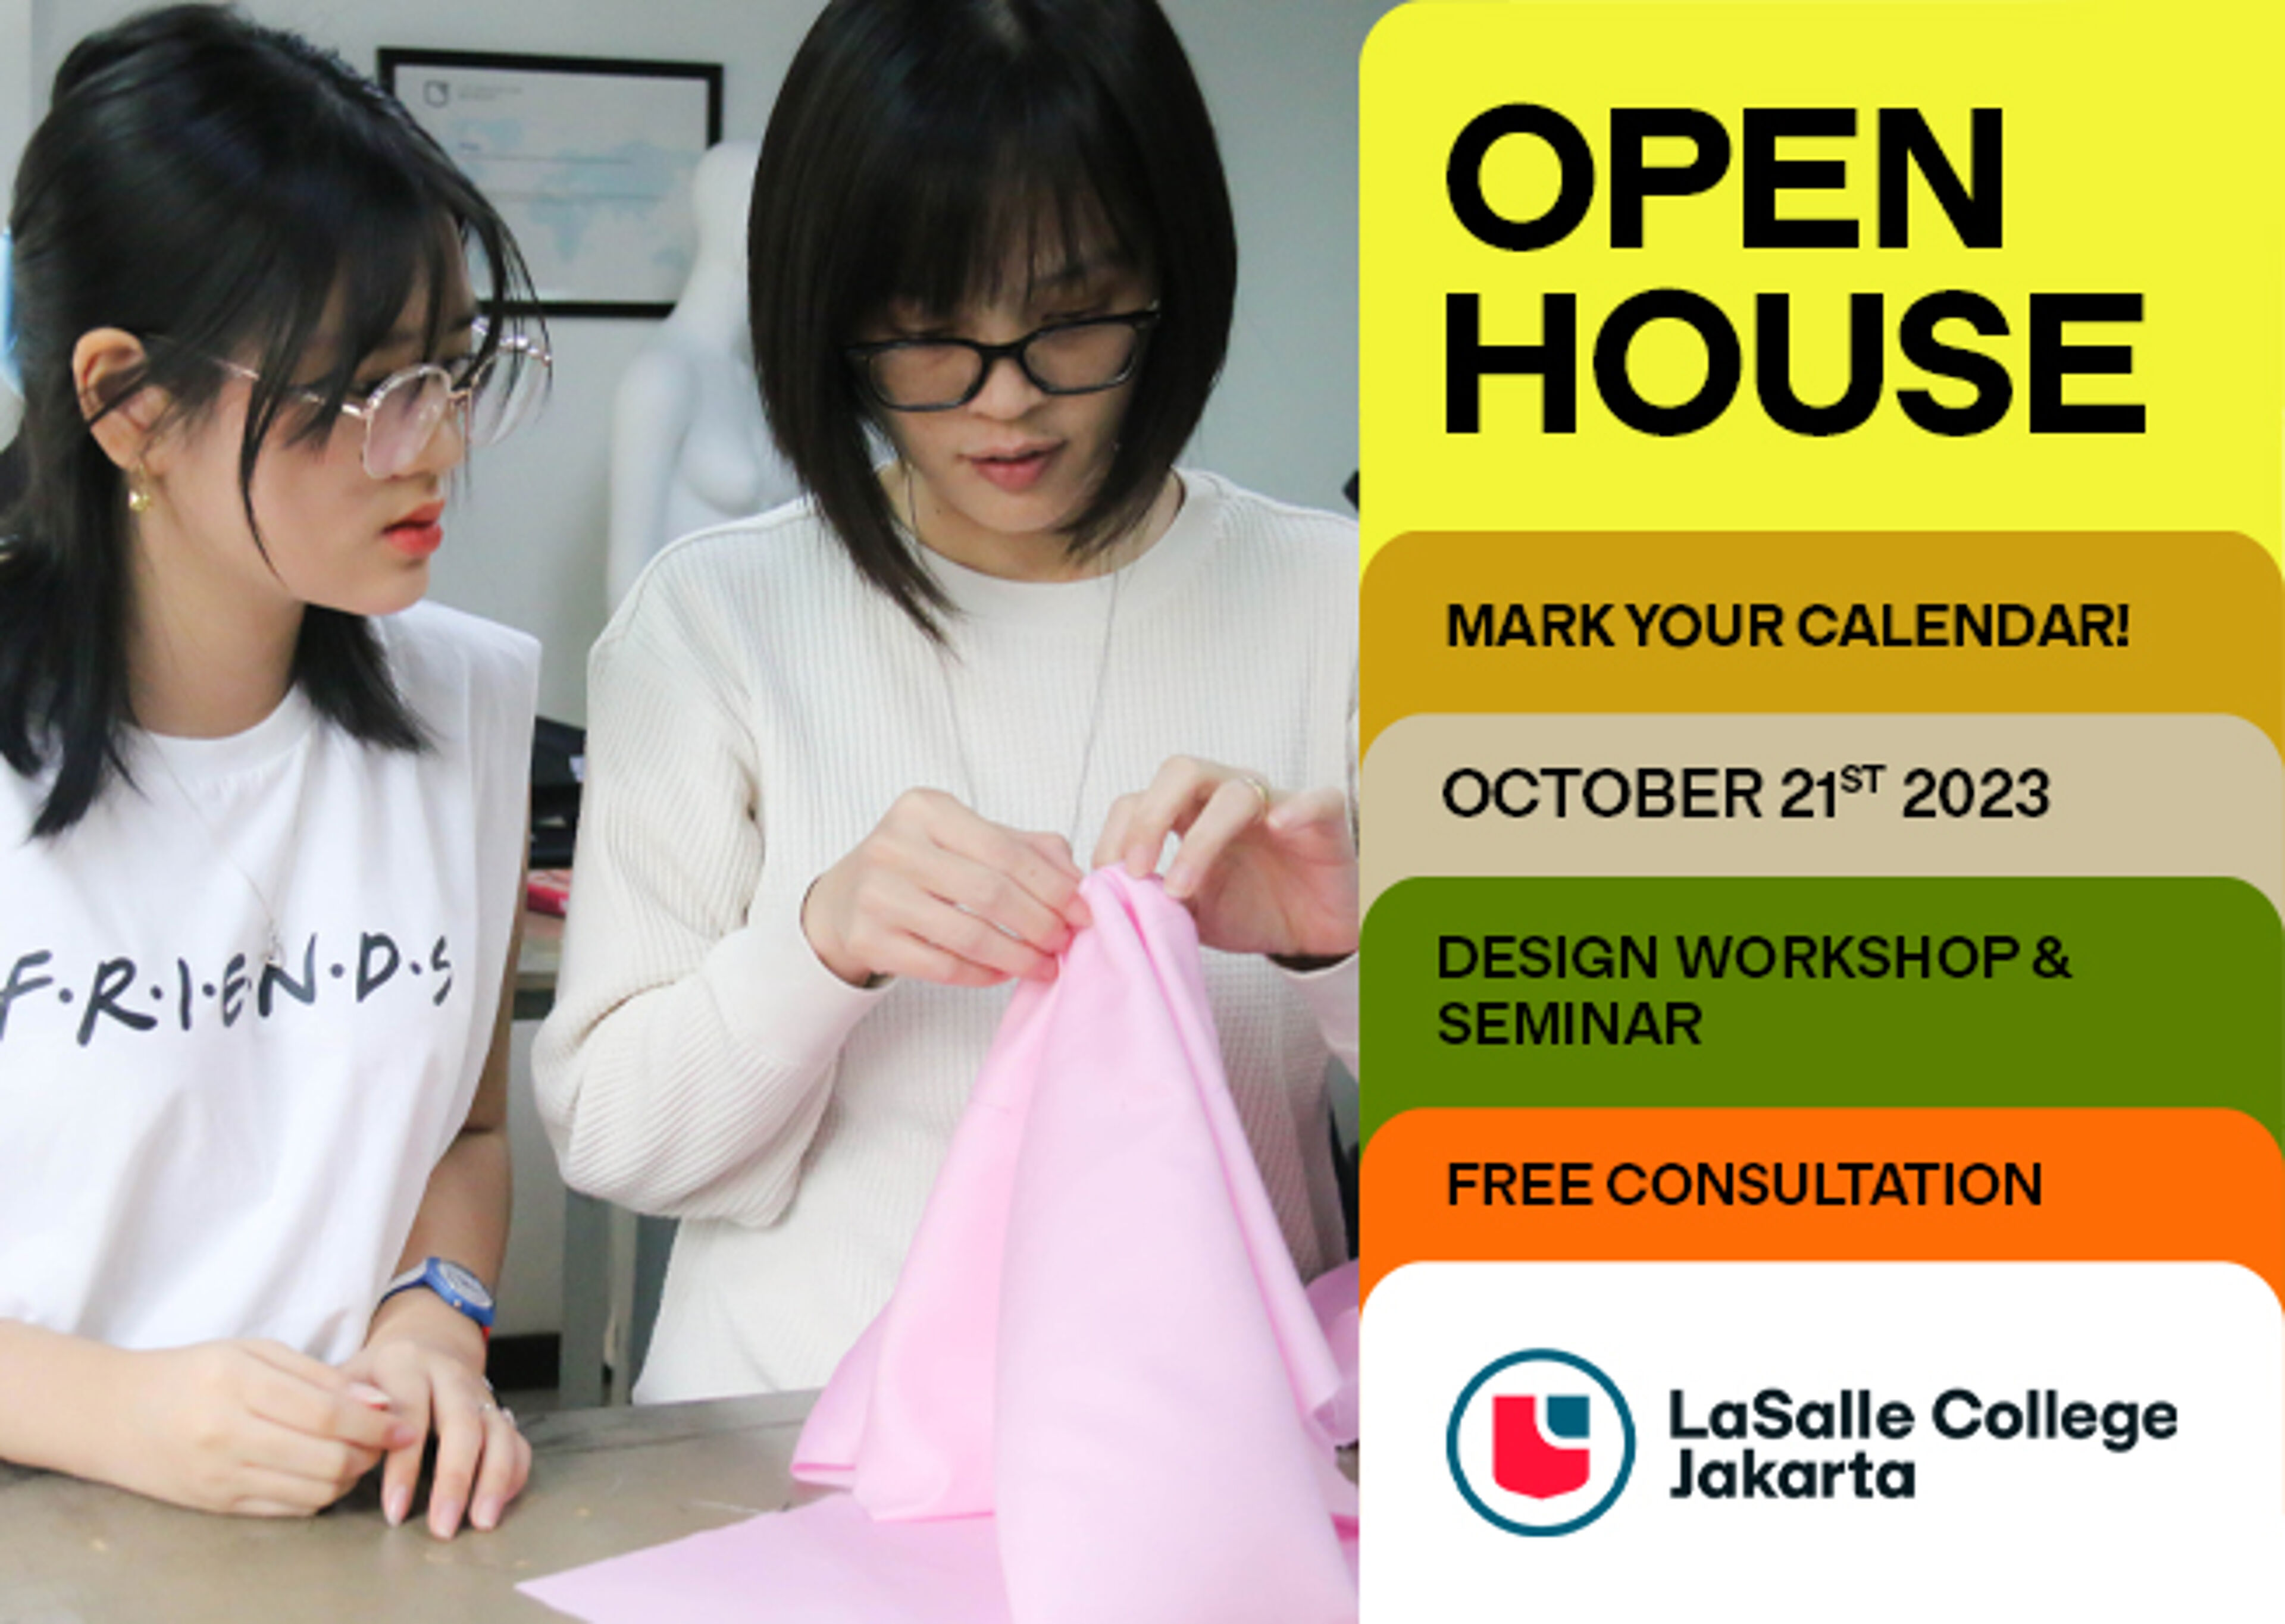 Two focused individuals working on a fabric project, advertising LaSalle College Jakarta's Open House event with a workshop and free consultation on October 21, 2023.